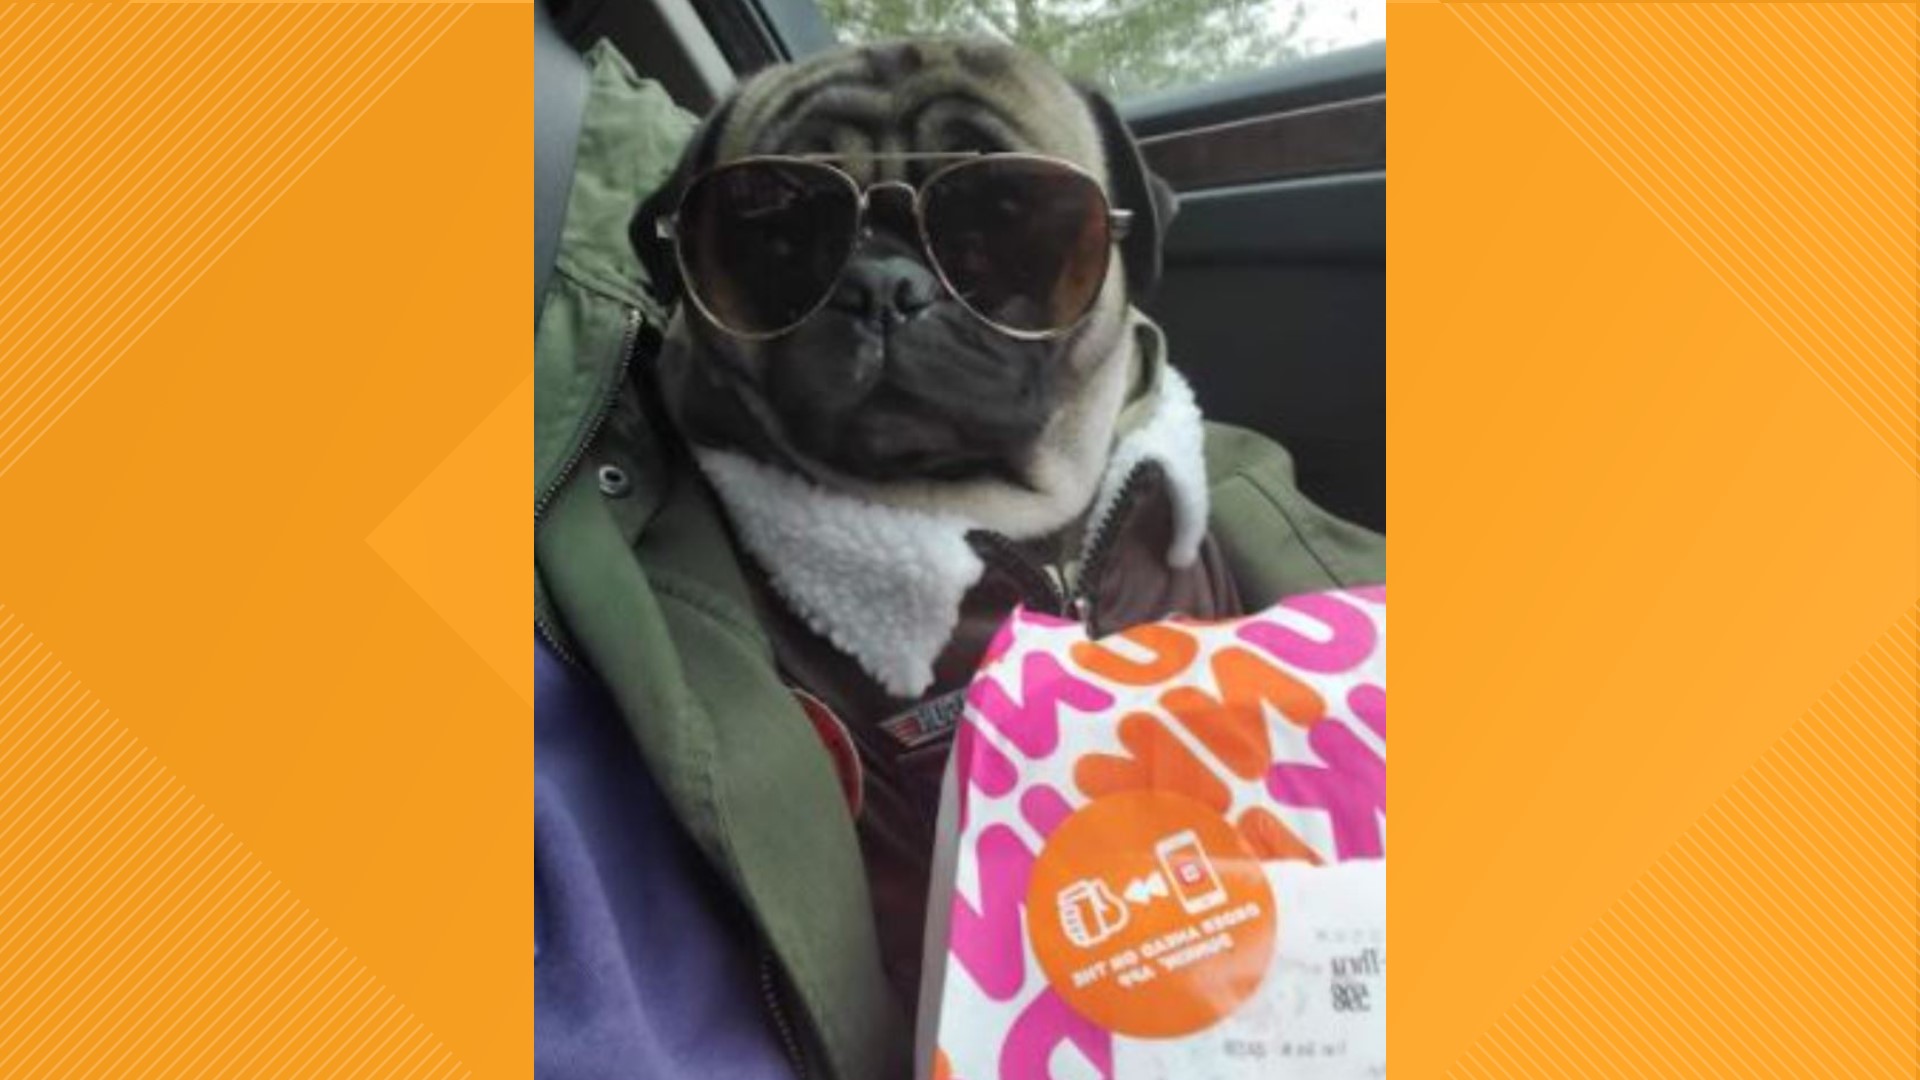 A pug named "Polo" from Wayne County is capturing the hearts of thousands of people worldwide, all through his own special Facebook group.